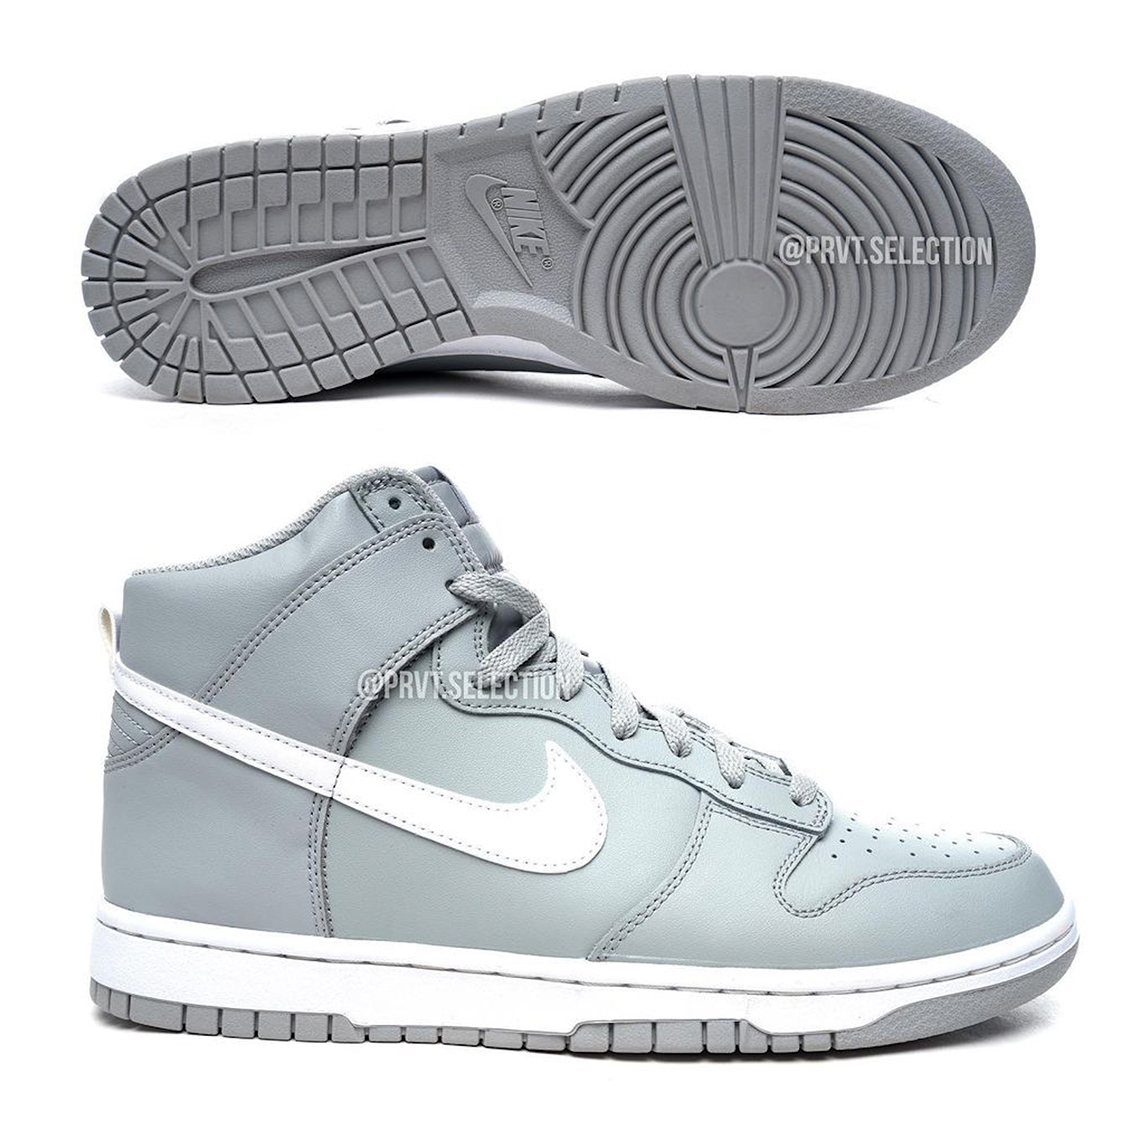 nike Experience dunk high wolf grey white 2023 6